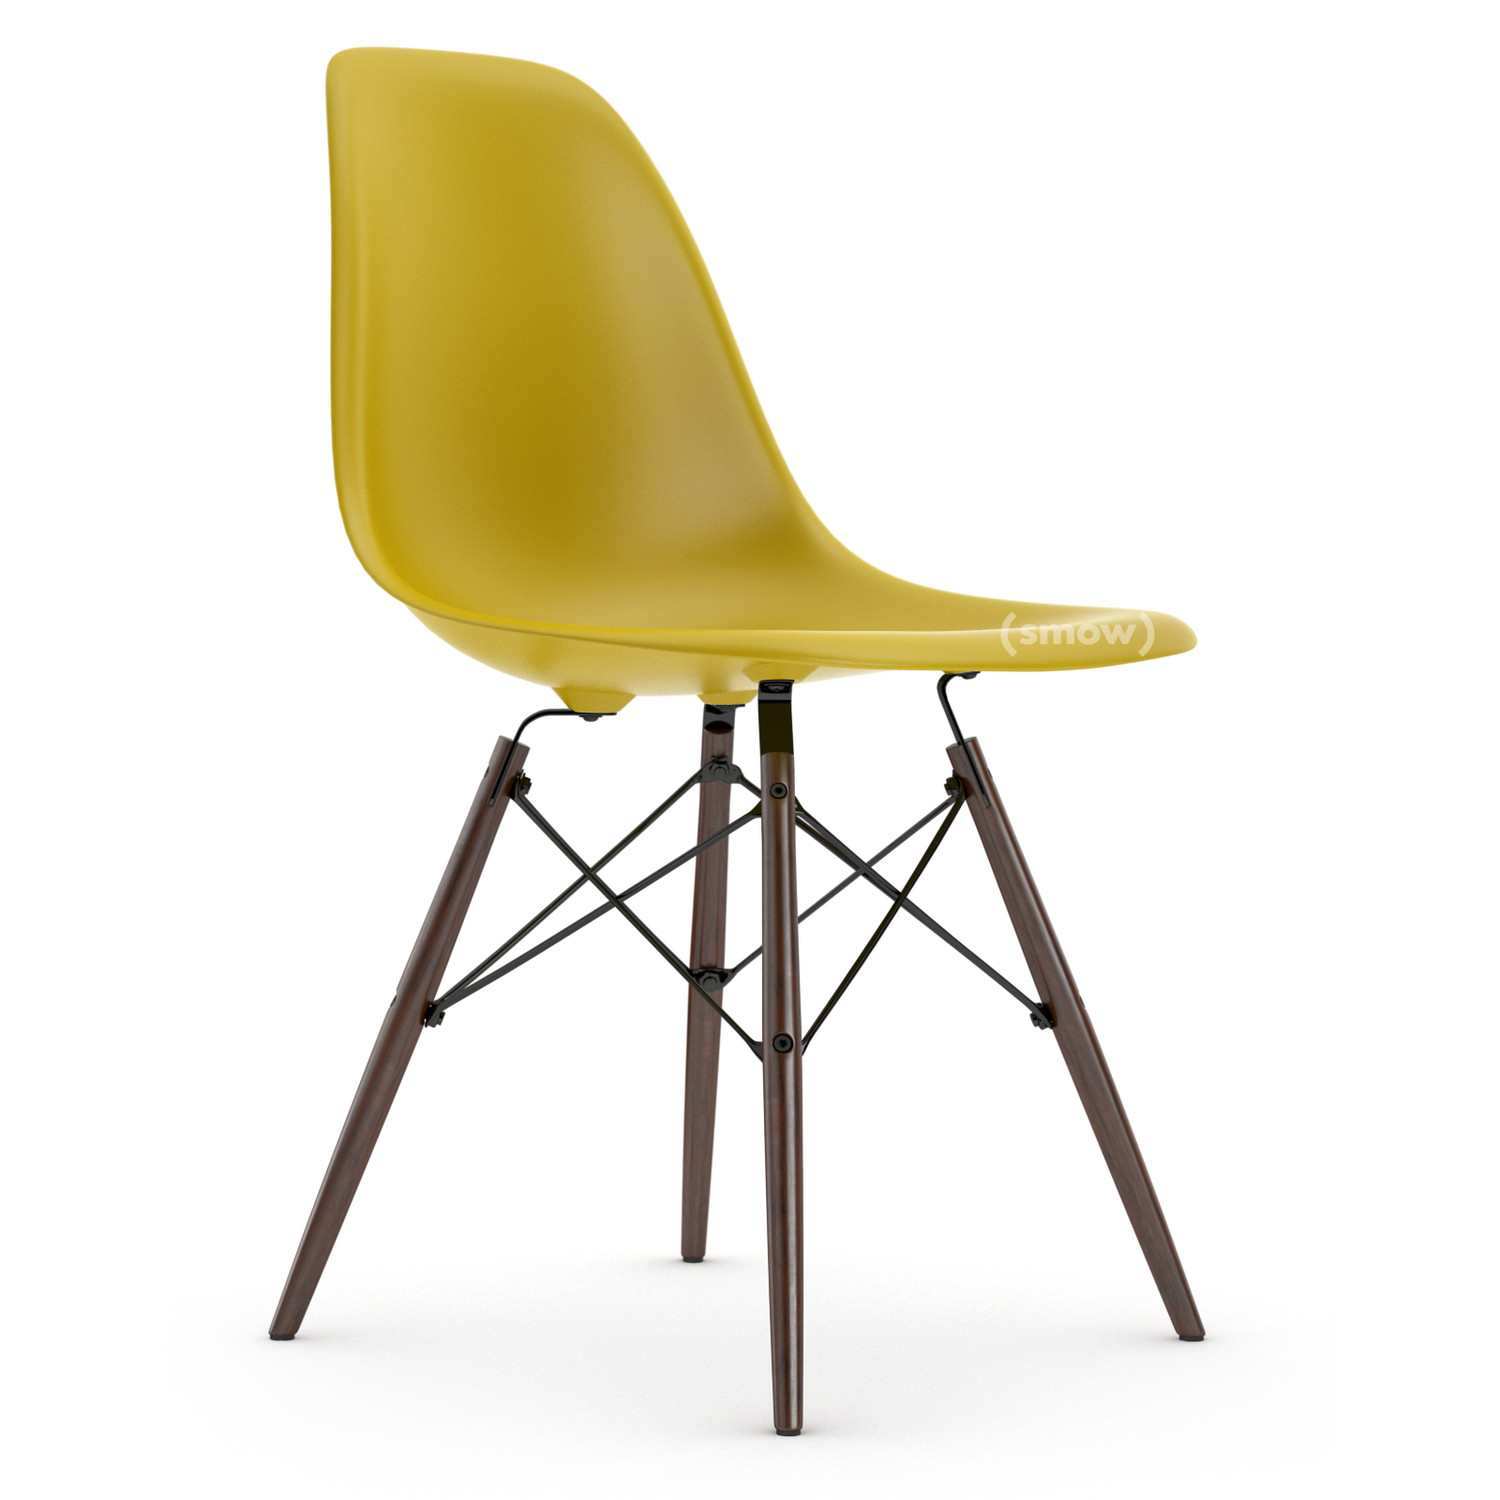 Vitra Eames Plastic Side Chair DSW, Without upholstery, Without upholstery, Standard version - 43 cm, Dark maple by Charles & Ray Eames, 1950 - Designer furniture by smow.com